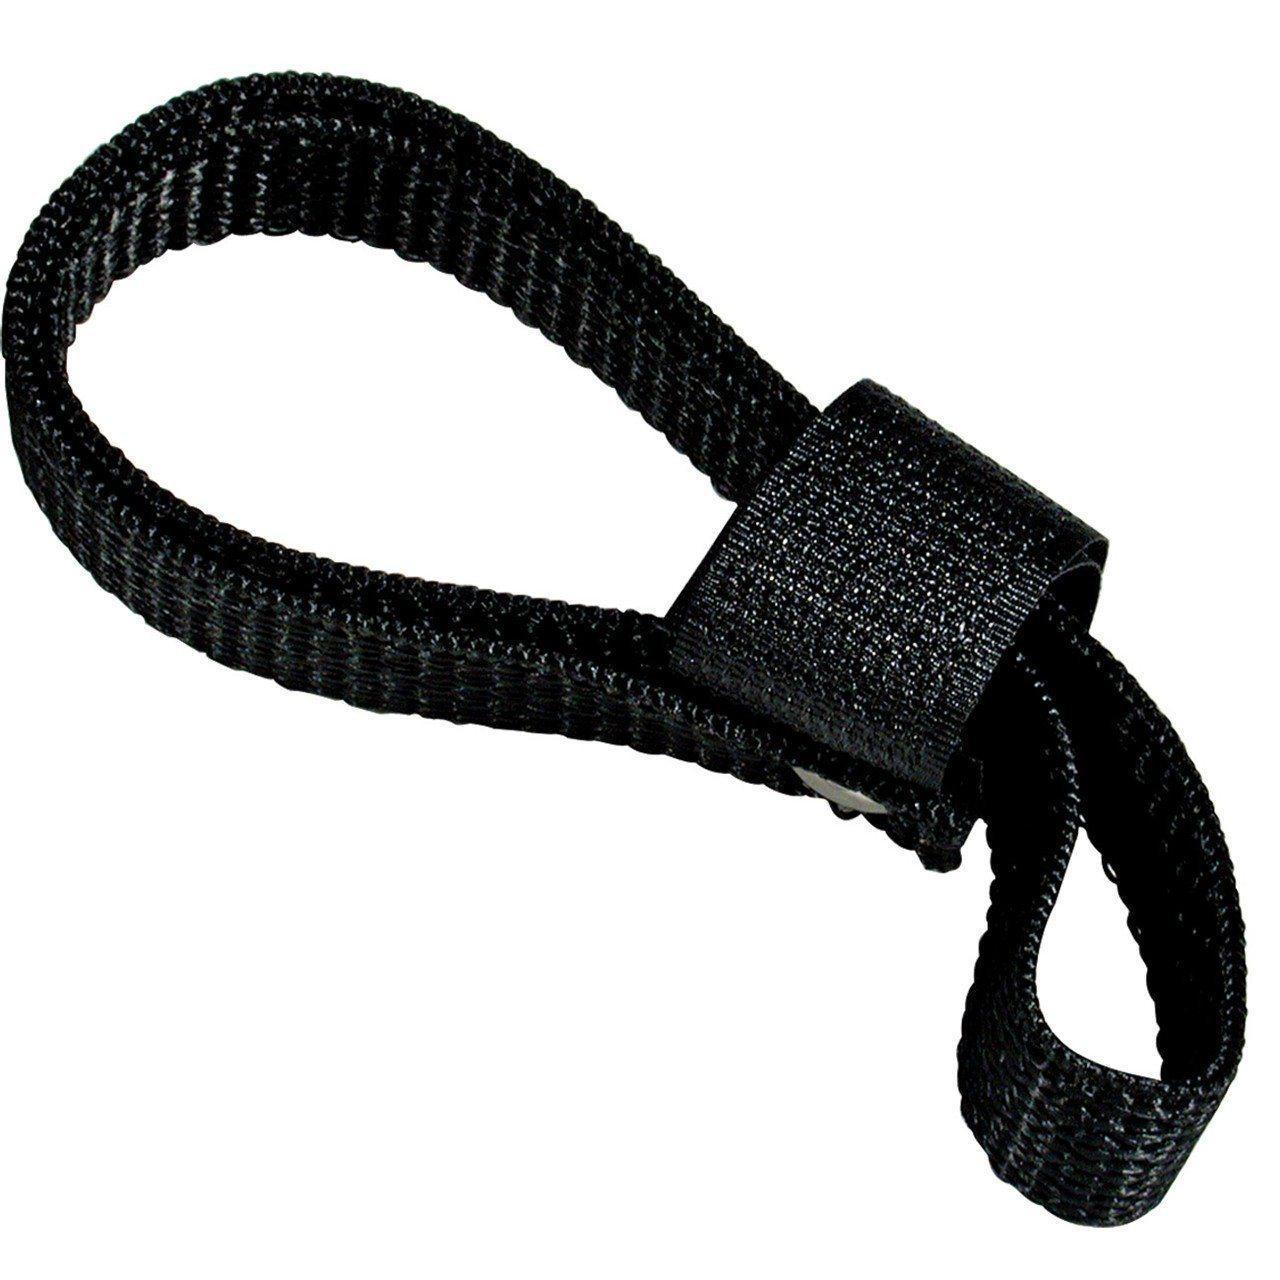 Cane Wrist Strap - The Low Vision Store